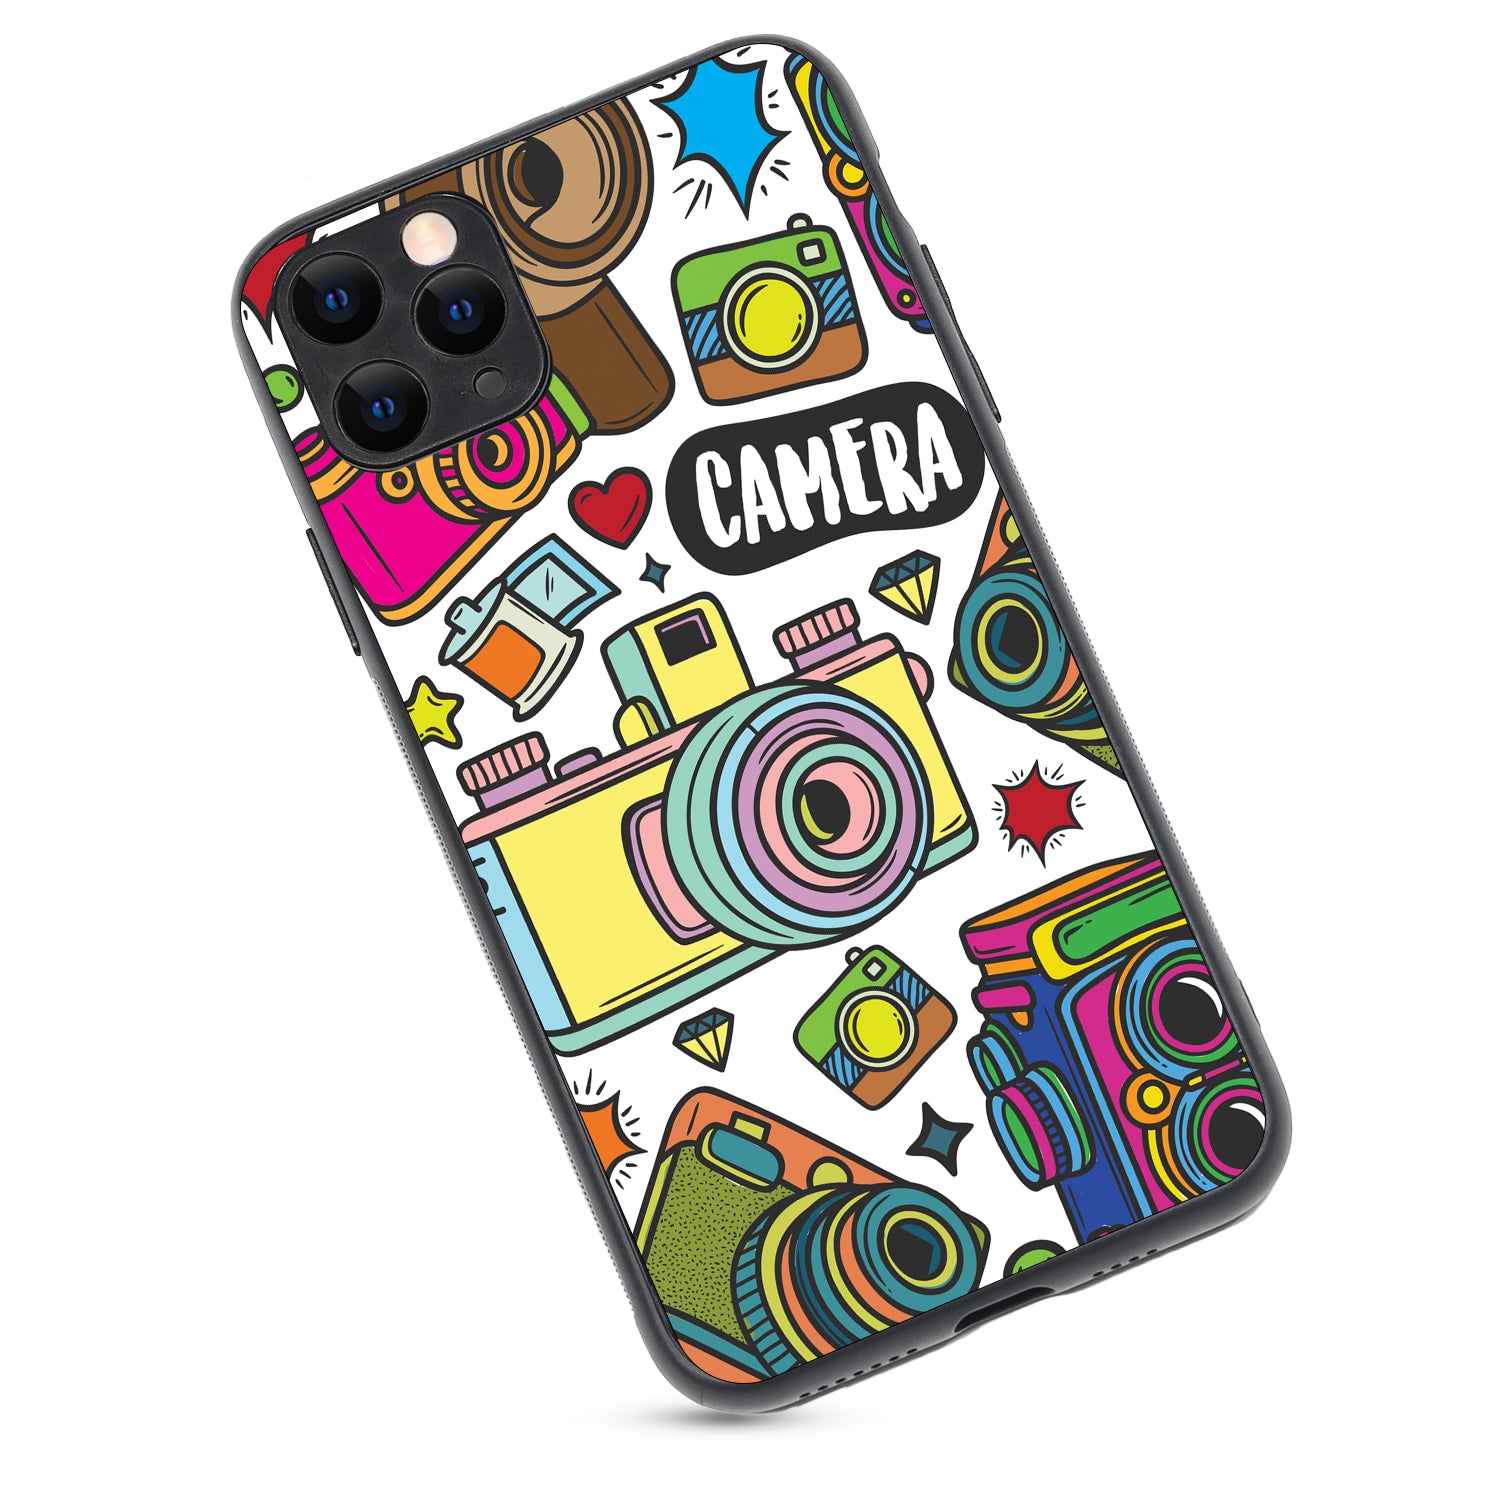 Photography Doodle iPhone 11 Pro Max Case